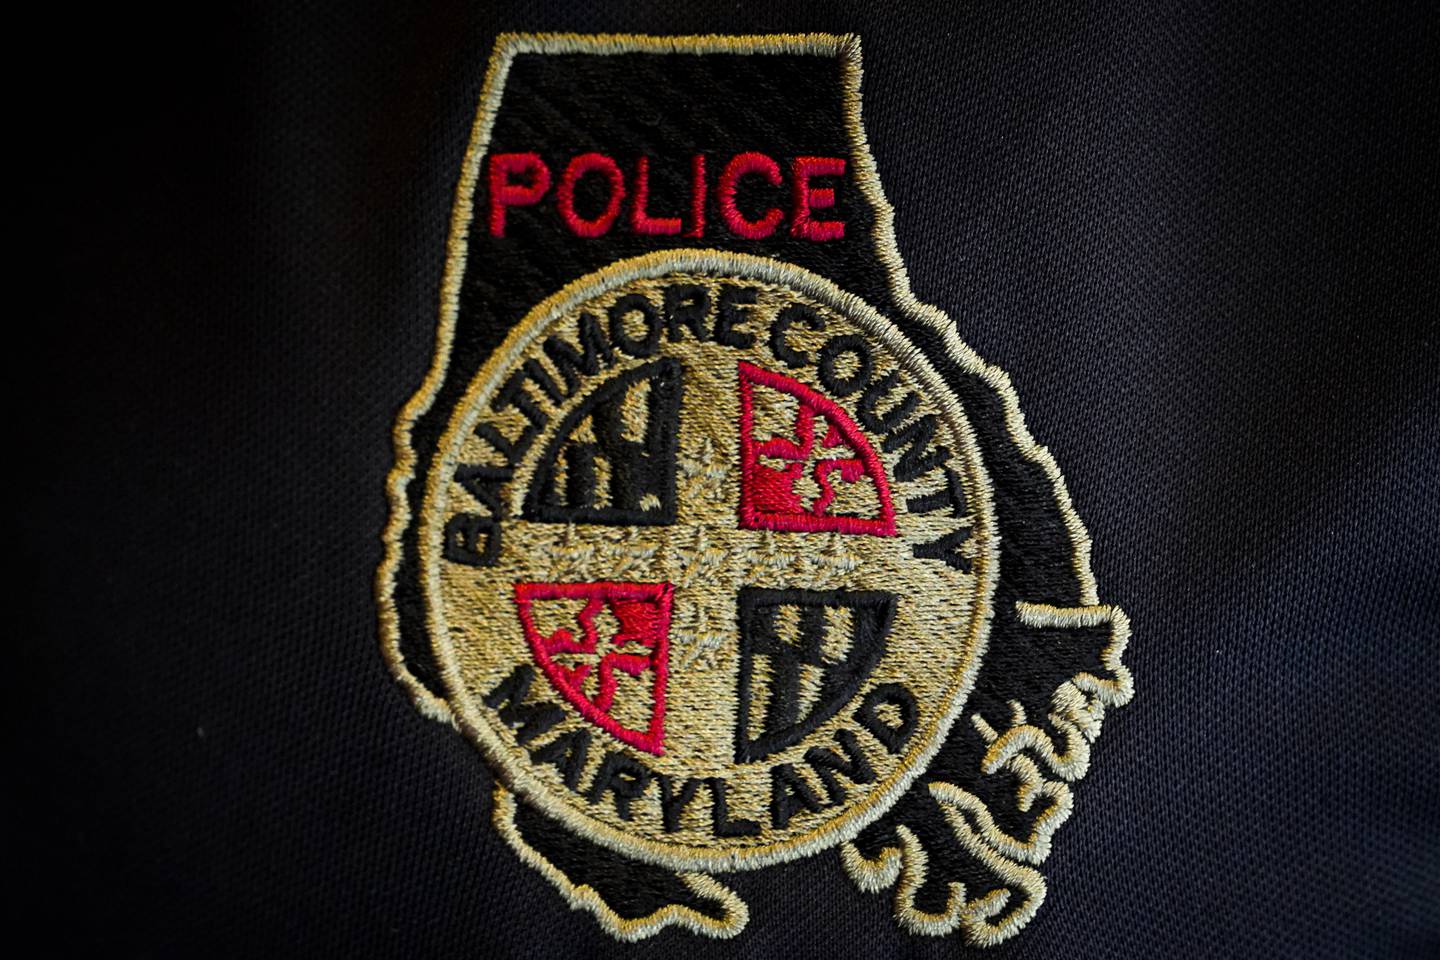 6/16/22—A Baltimore County Police Officer’s polo patch.